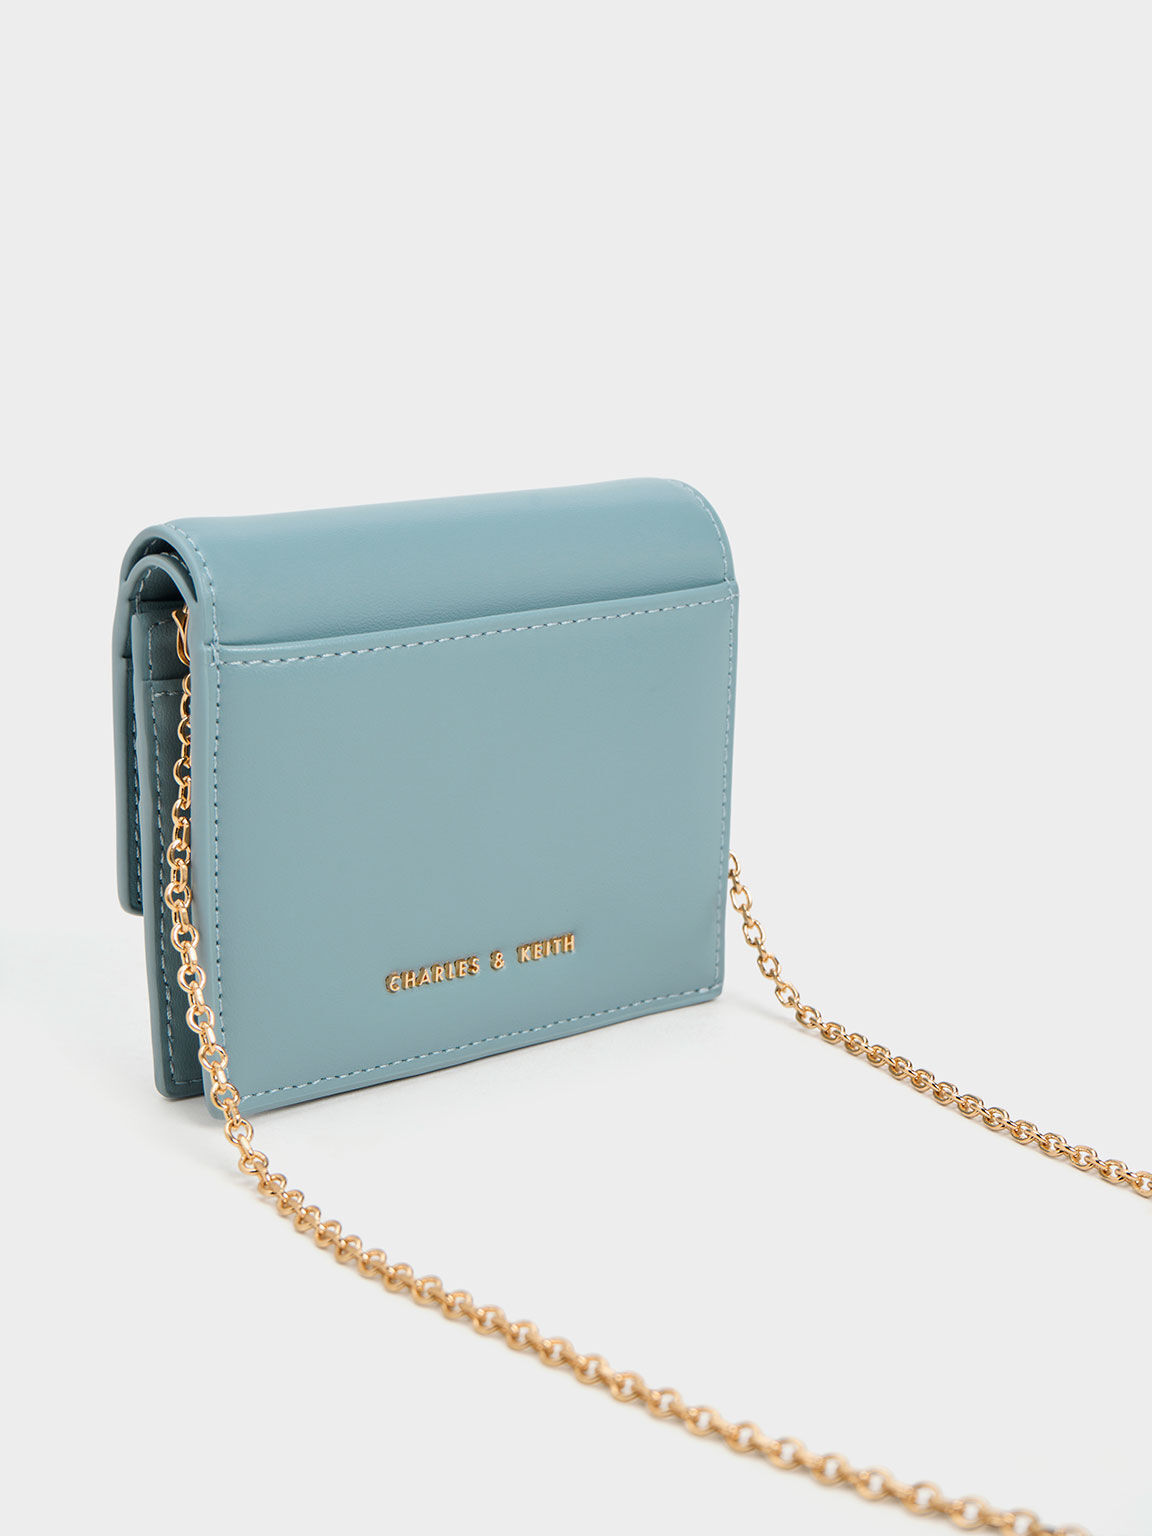 charles and keith long wallet chain｜TikTok Search